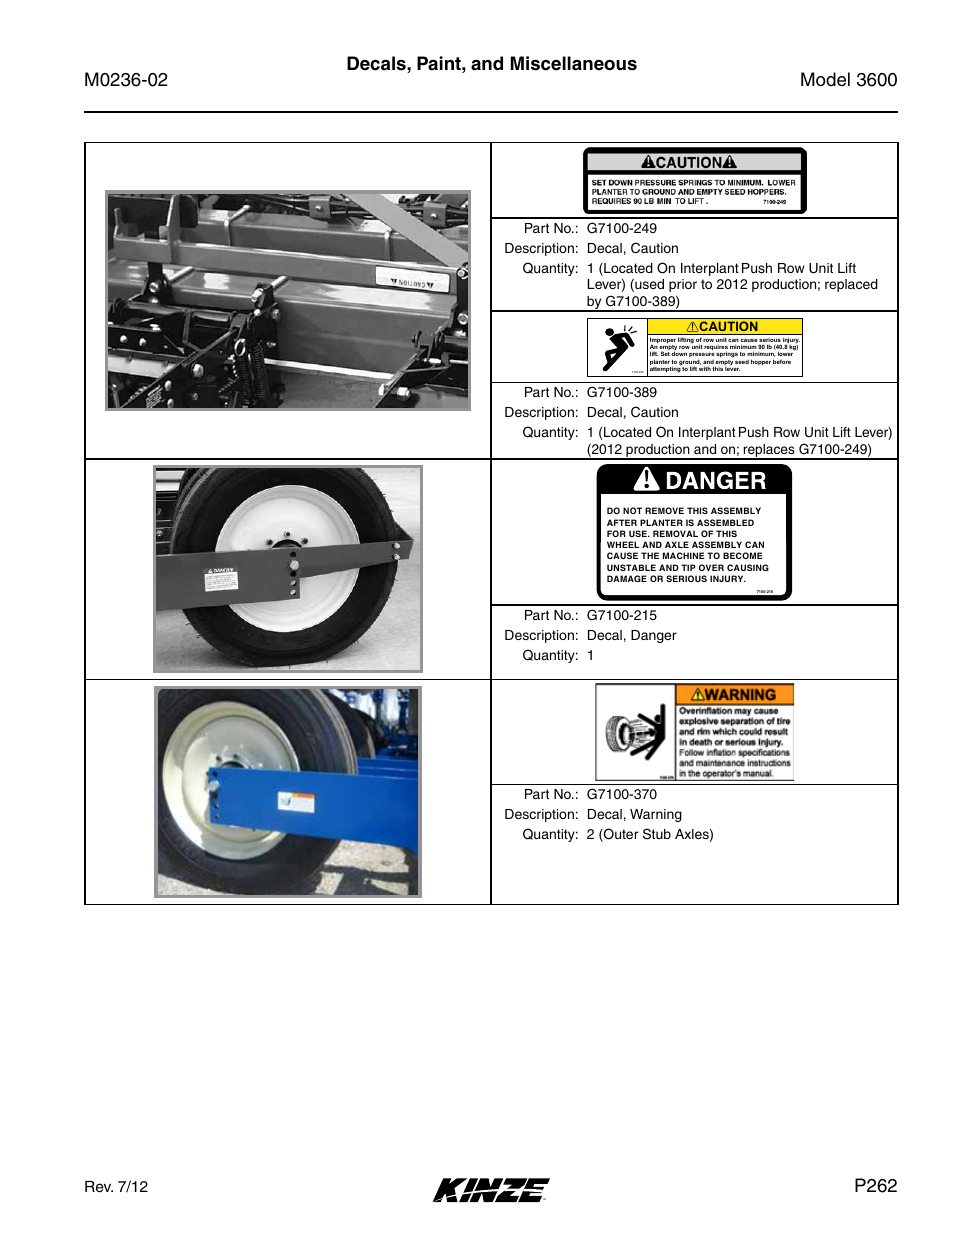 P262 | Kinze 3600 Lift and Rotate Planter Rev. 5/14 User Manual | Page 265 / 302